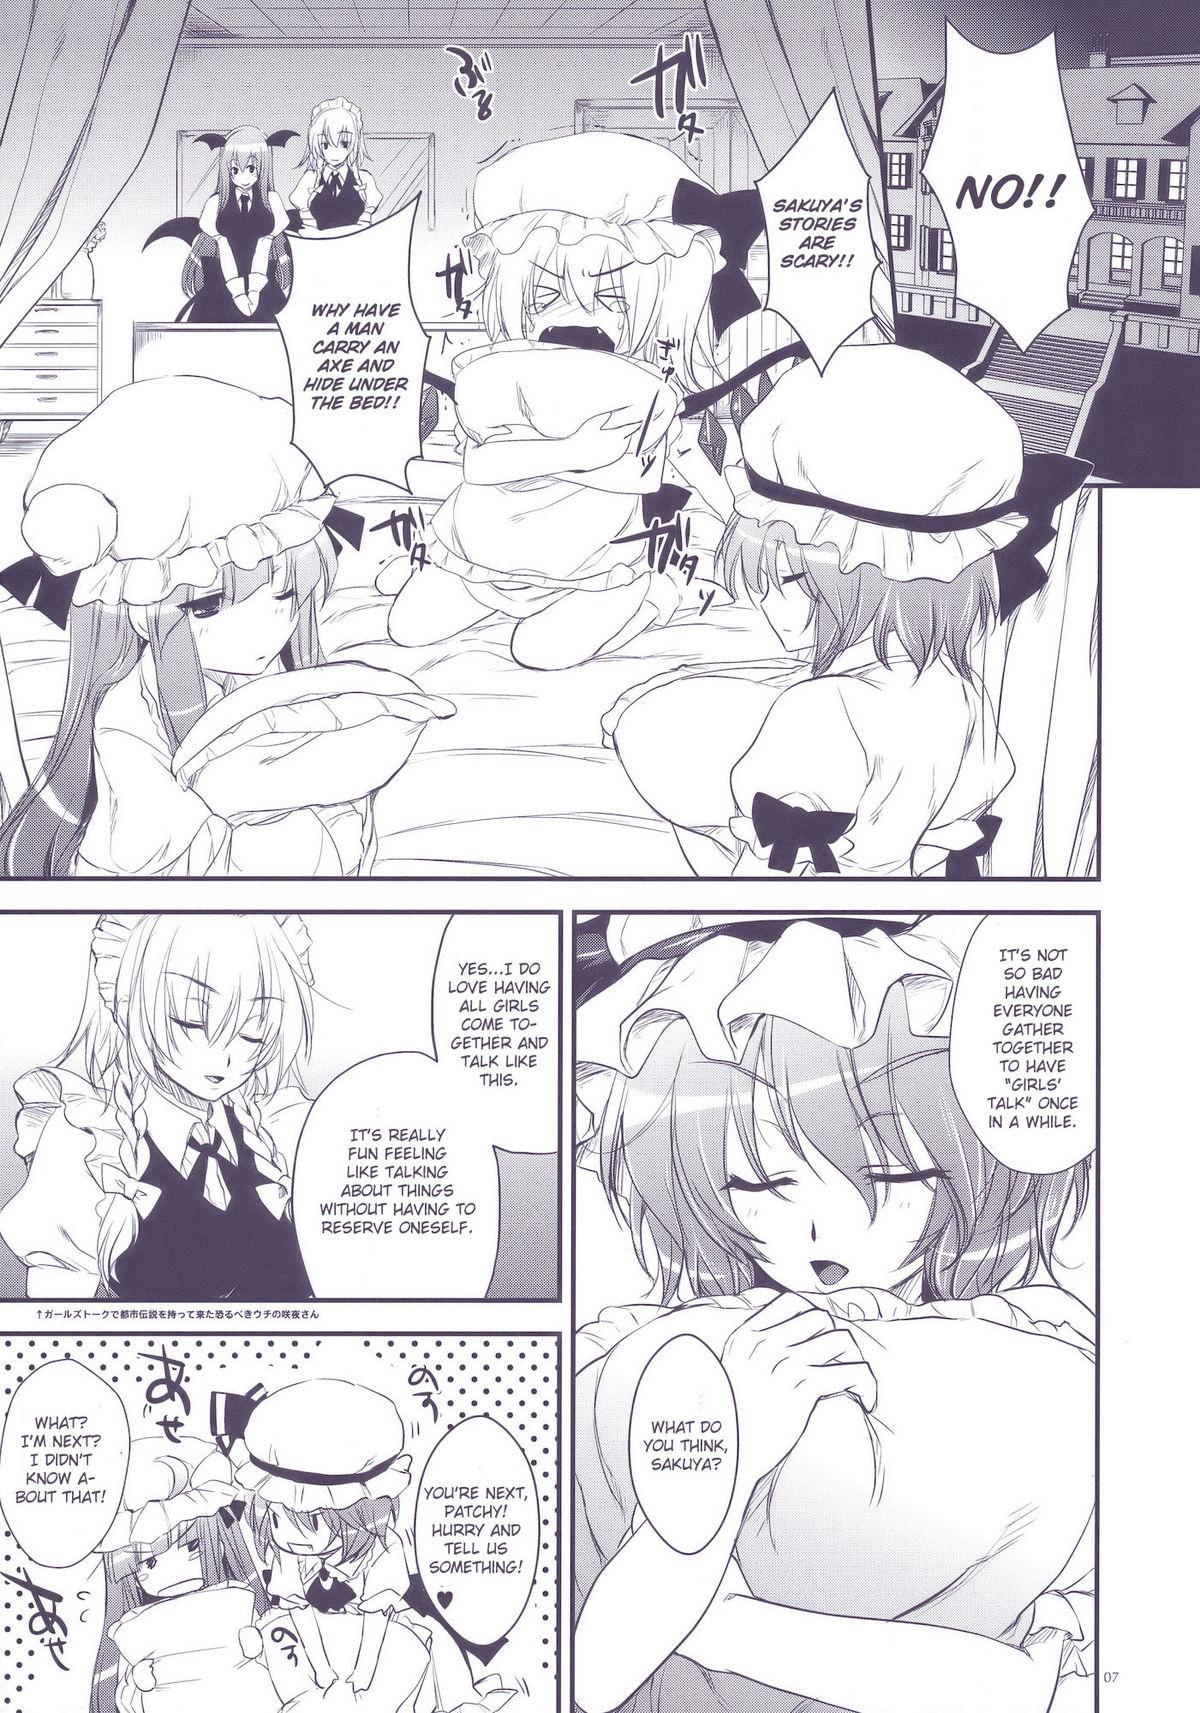 Rope GariGari 22 - Touhou project Fishnet - Page 7